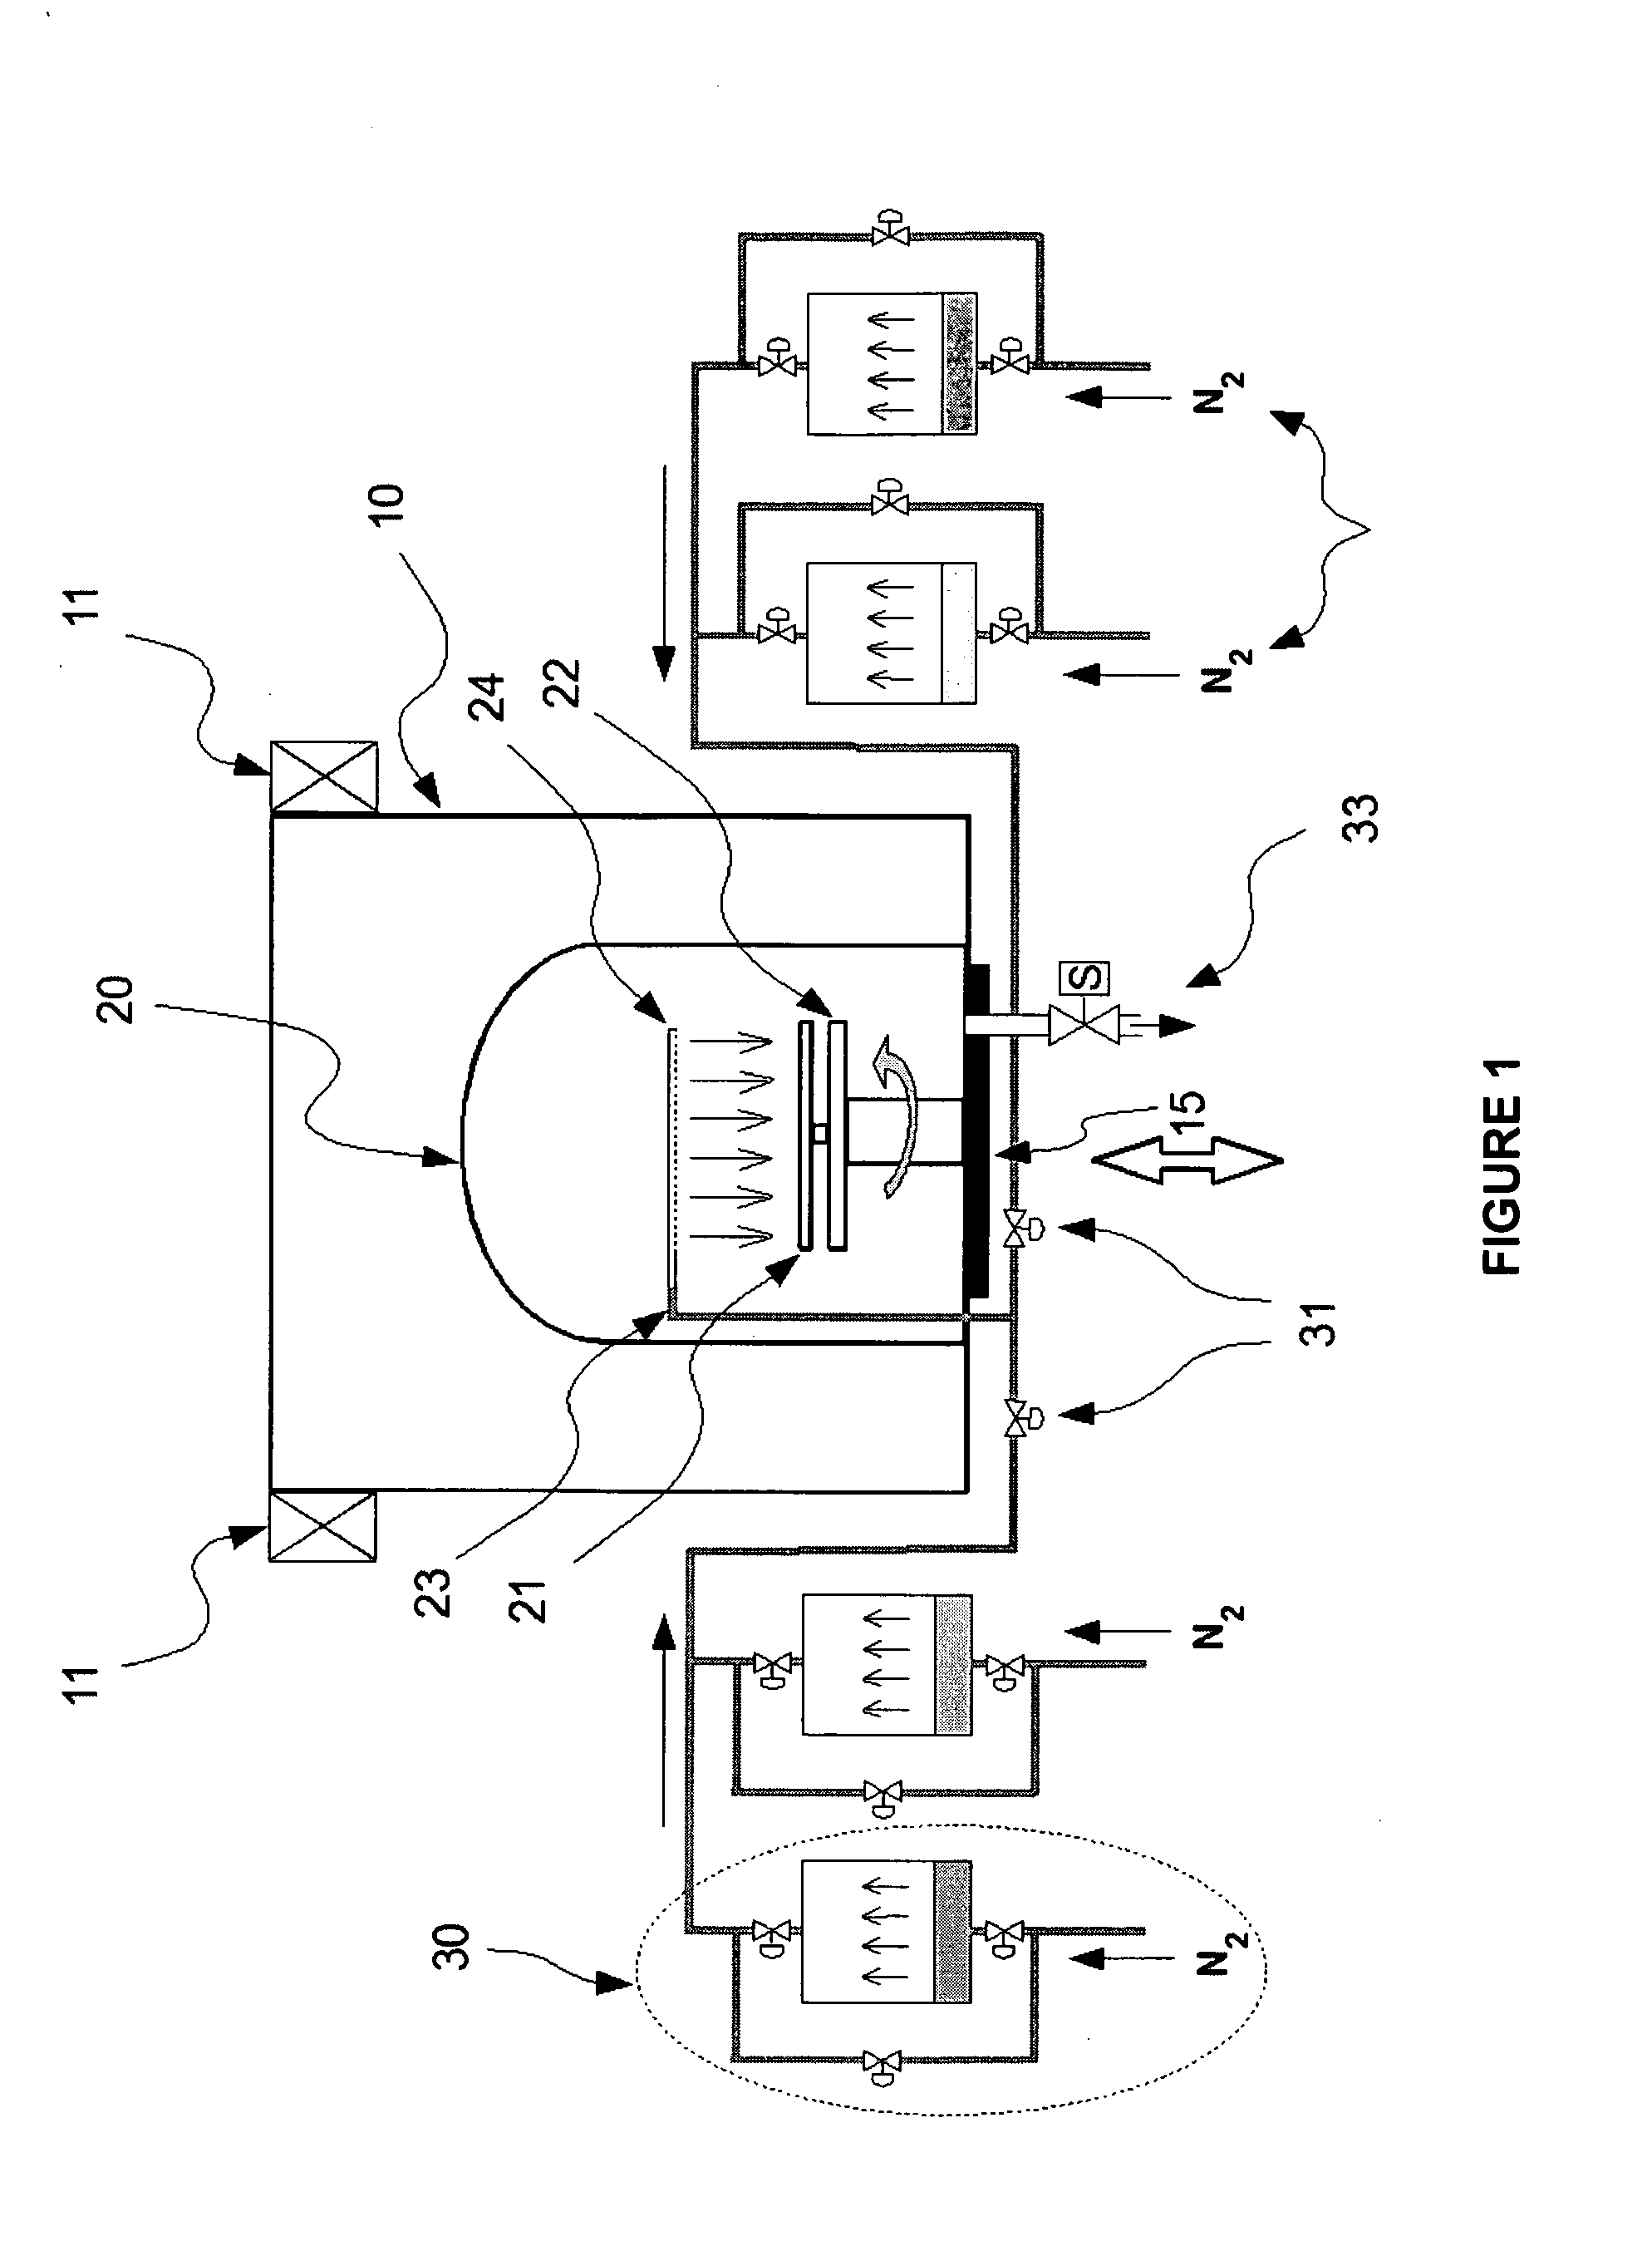 Method and apparatus for microwave treatment of dielectric films